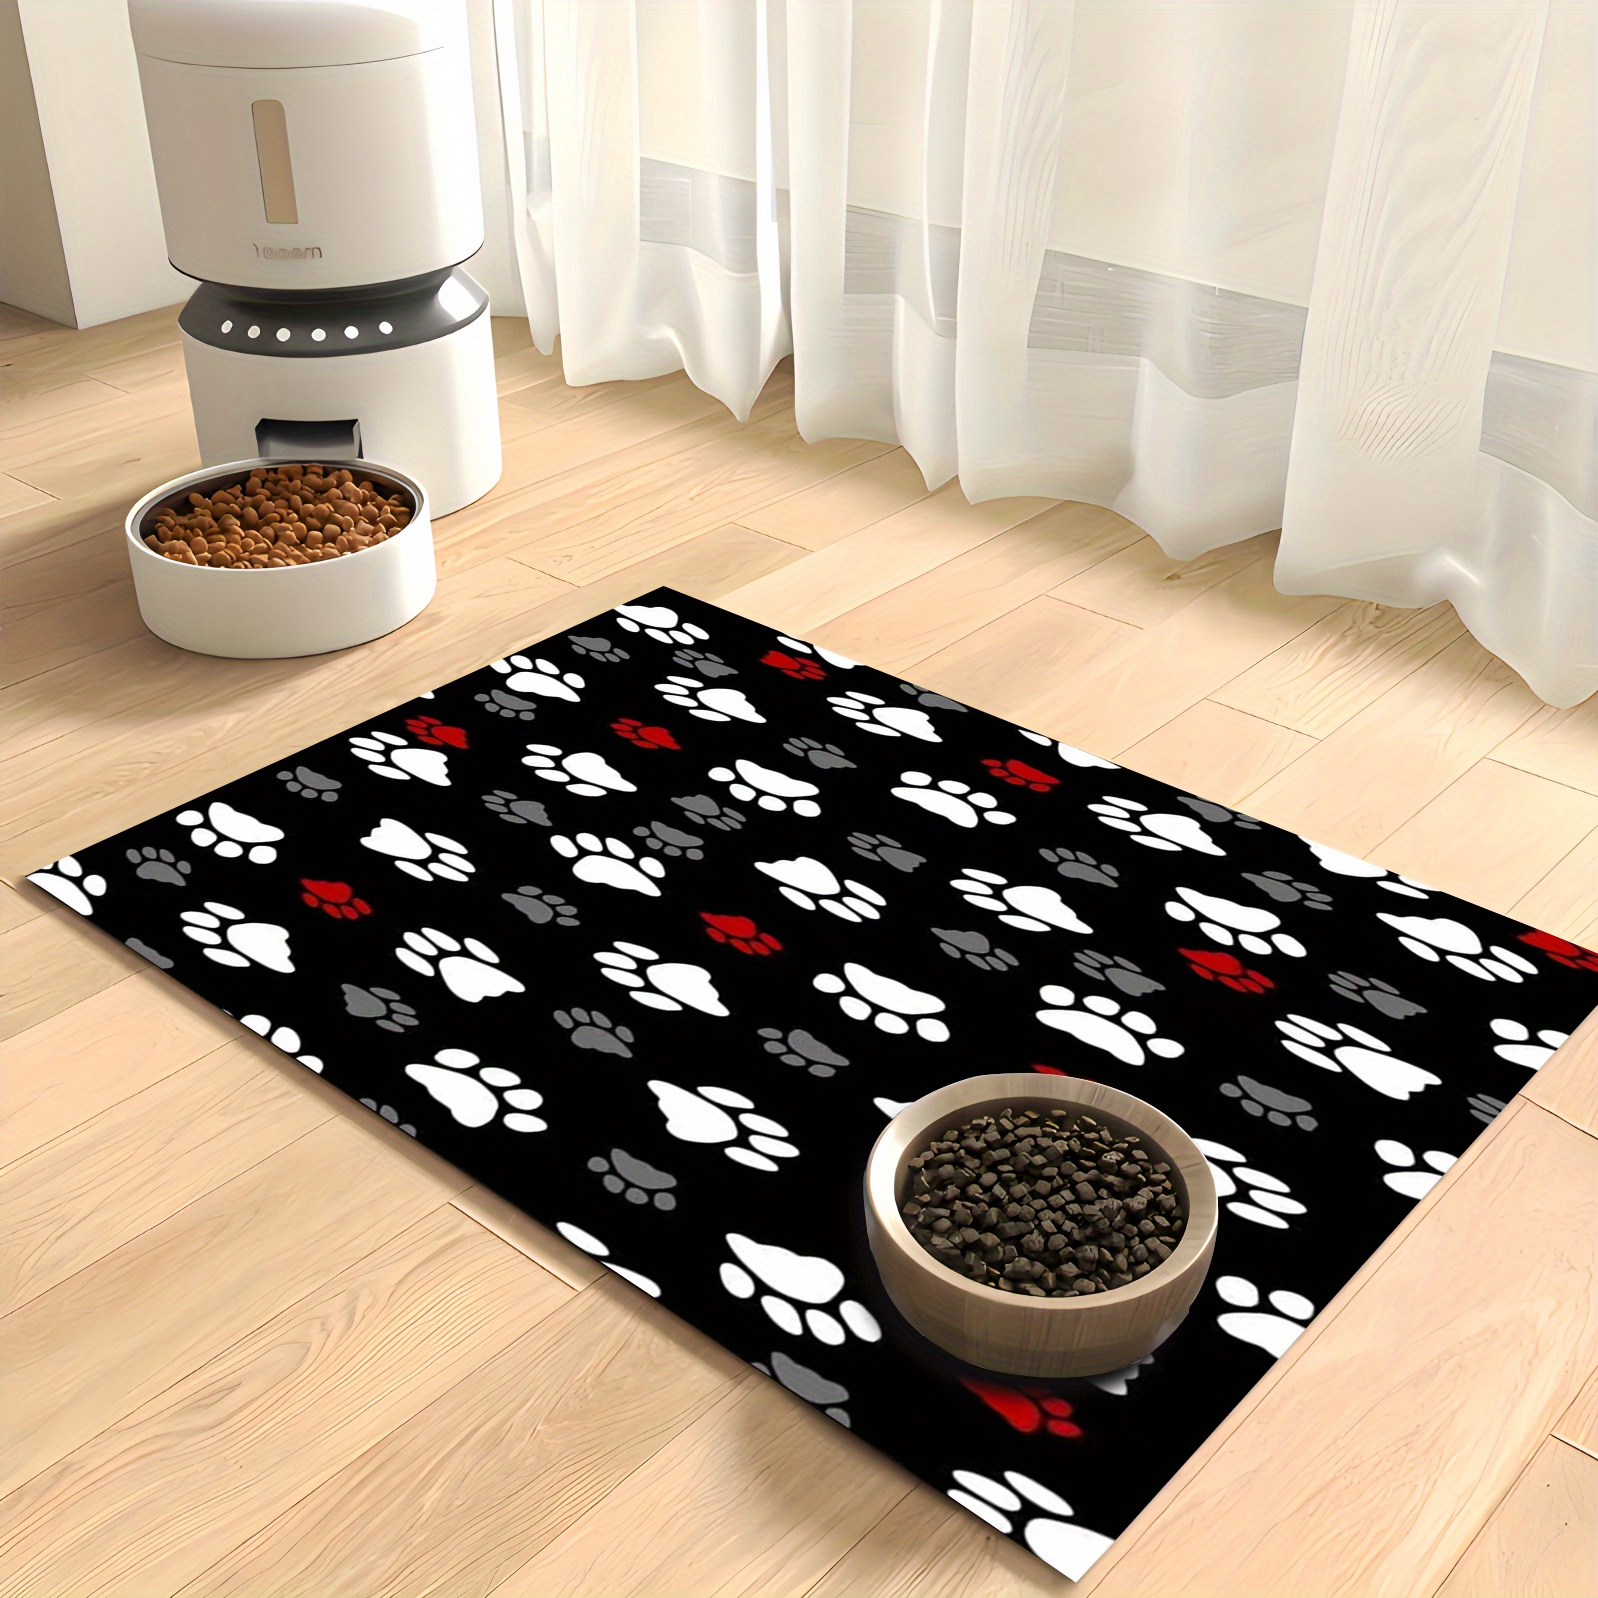 

Jit Waterproof Non-slip Polyester Feeding Mat For Dogs - Durable Pet Food Placemat For Indoor/outdoor Use, Easy To Clean Dog Bowl Mat With Paw Print Design